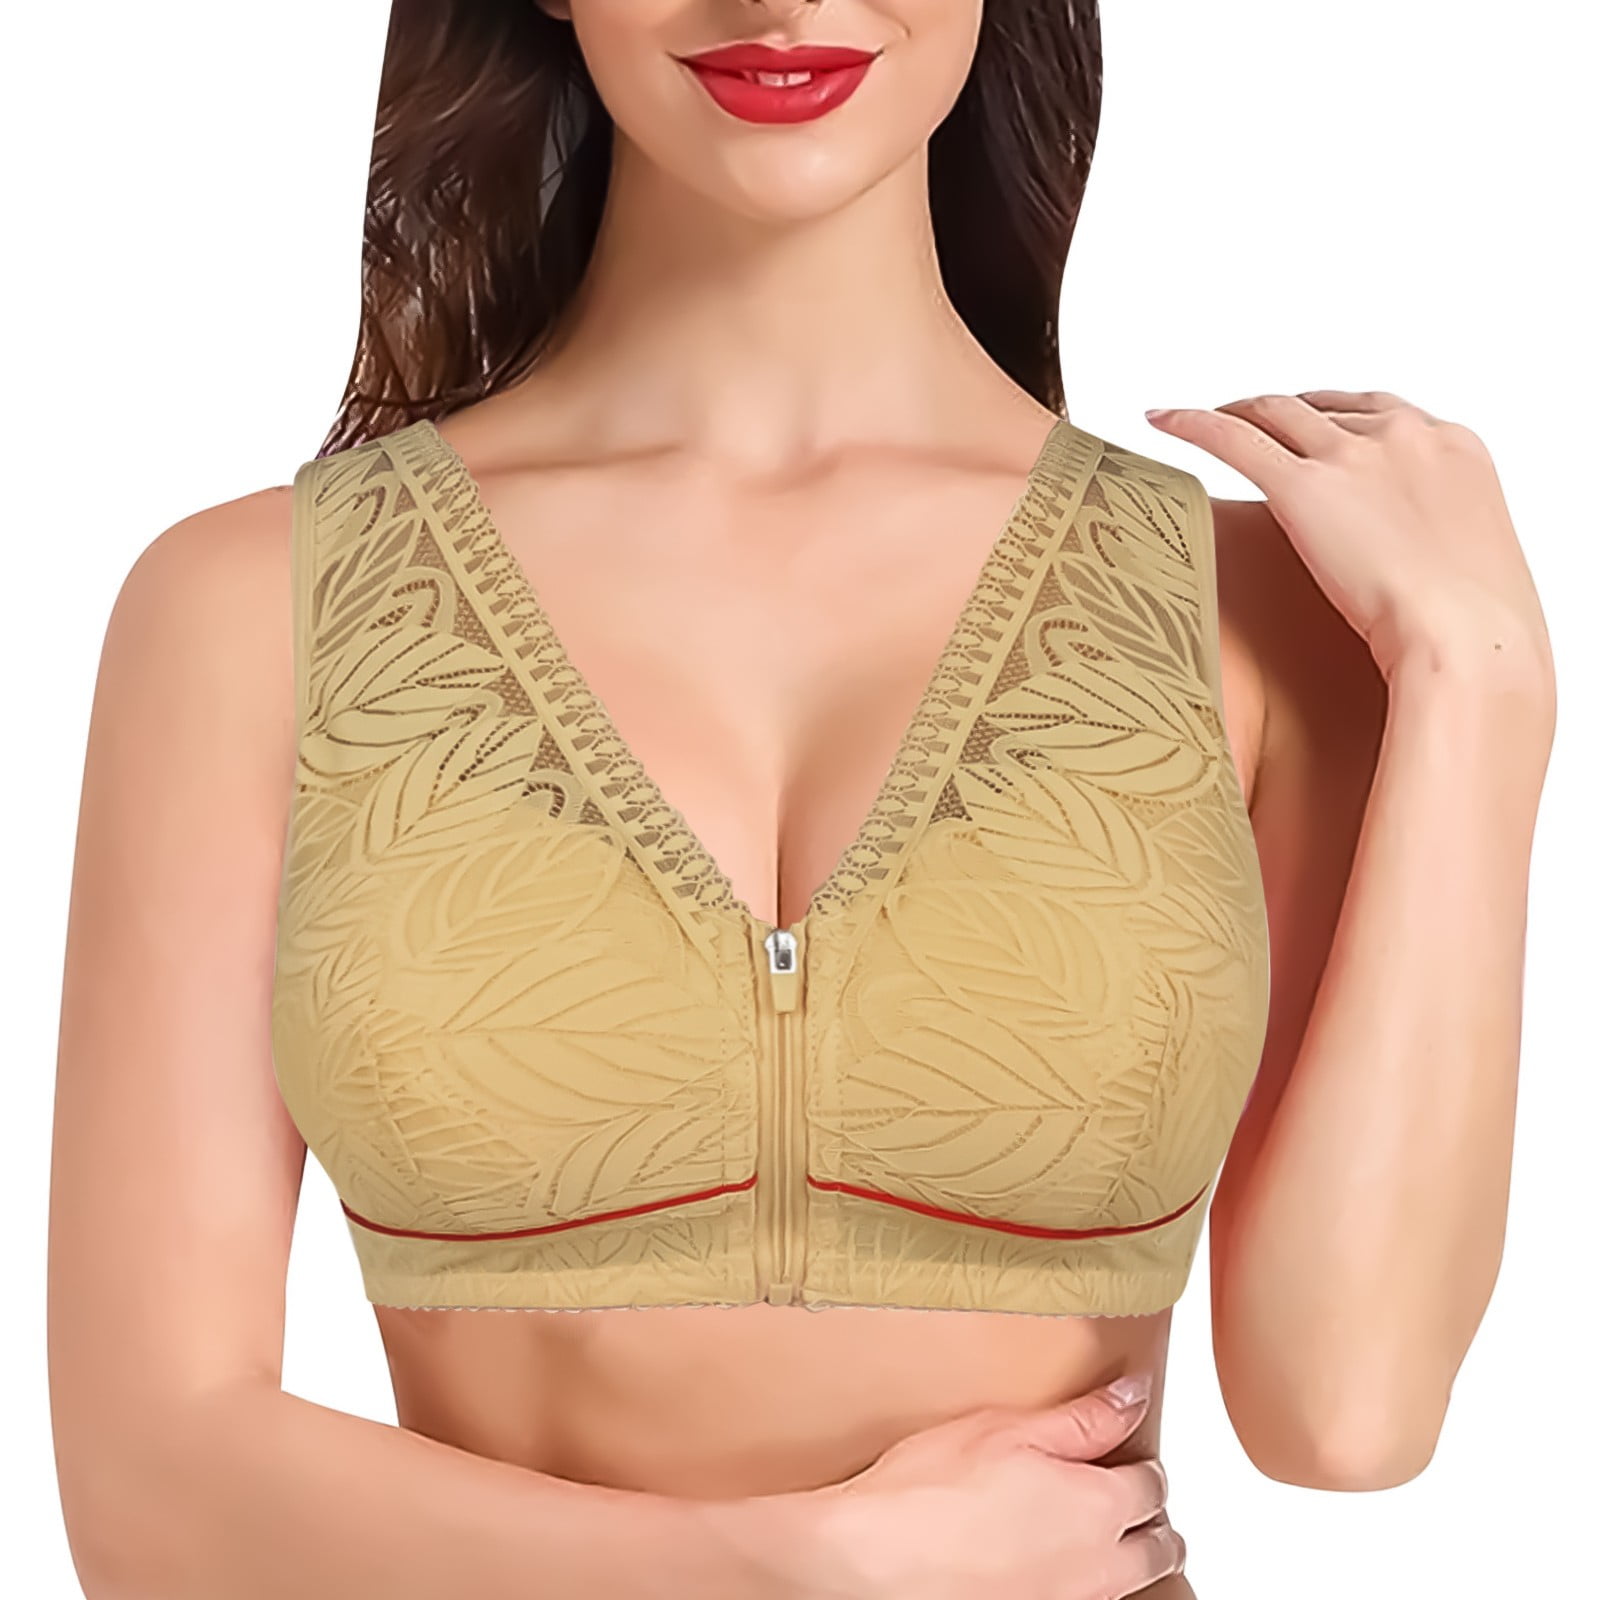 Bazyrey Women's Plus Size Bras Push Up Bras Two-piece Sexy Mesh Lingerie  See-through Lace Bra andSexy Lingerie Smoothing Lightly Lined Bras Green,S  (Buy 2 Get 3 ) 